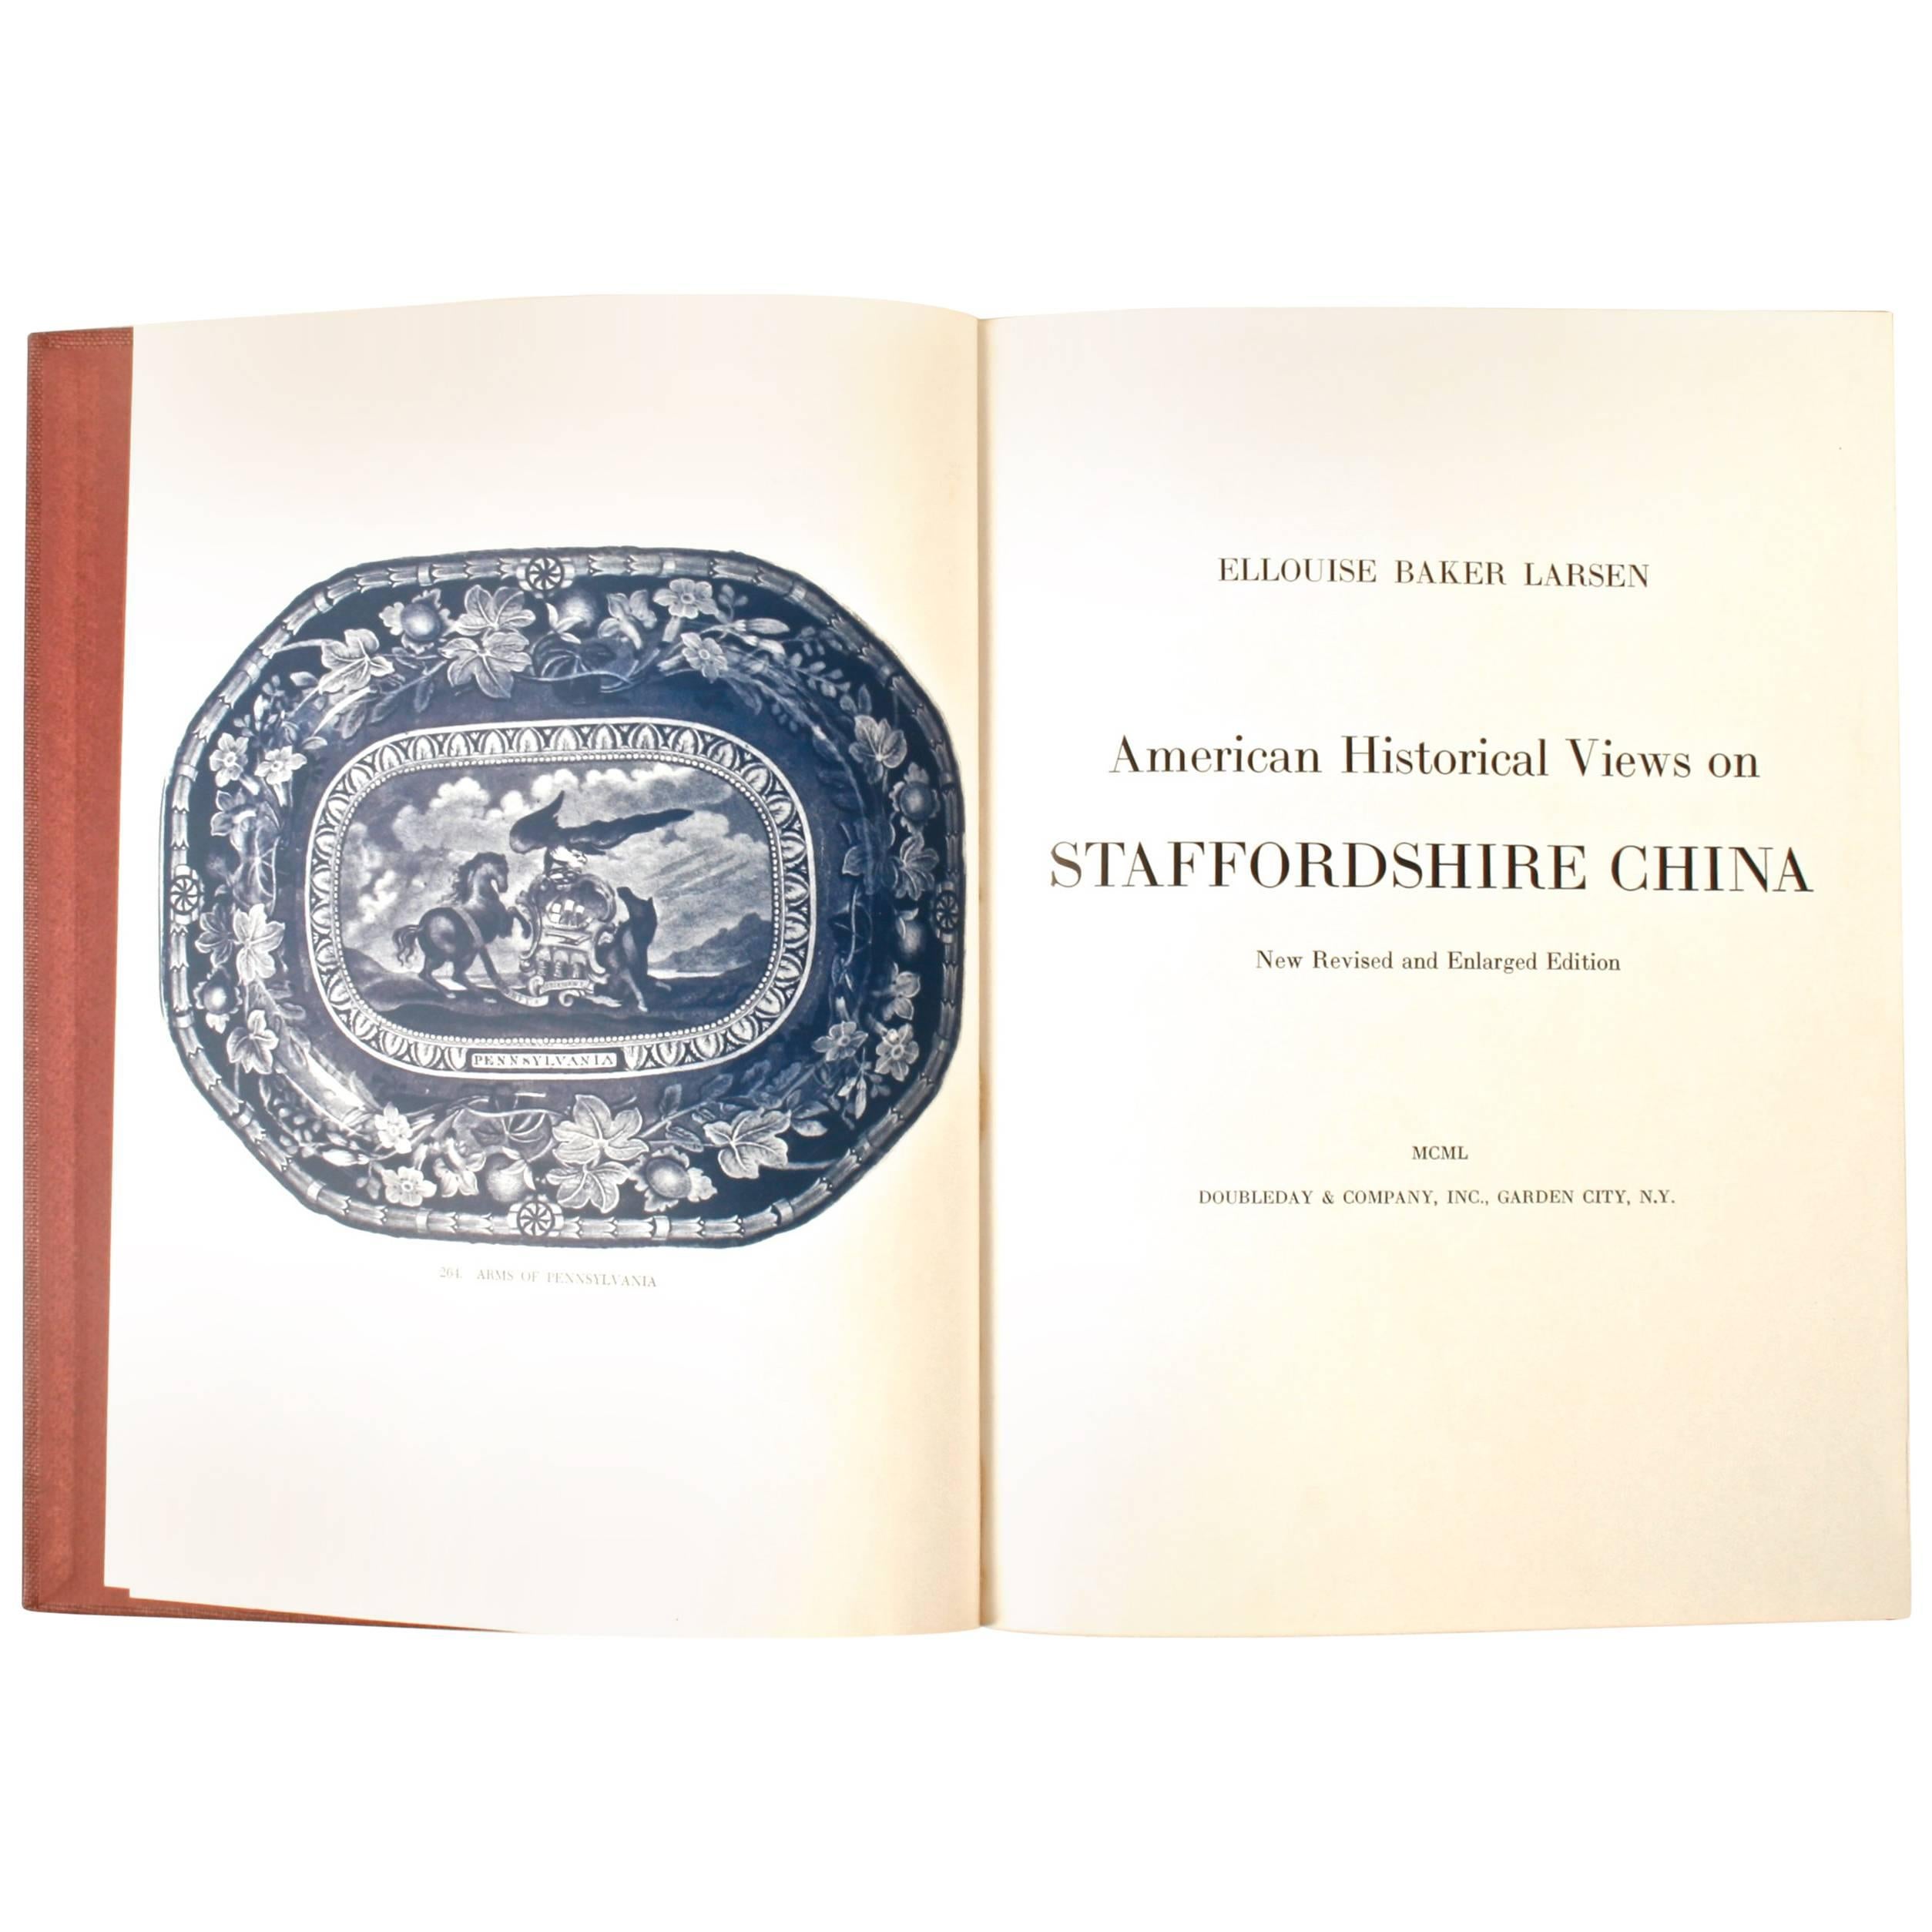 American historical views on Staffordshire China by Ellouise Baker Larsen. Doubleday, Doran & Company, Inc., New York, 1950. Rare, signed, new revised first edition thus hardcover with slipcase. Illustrated throughout with photographs of examples.